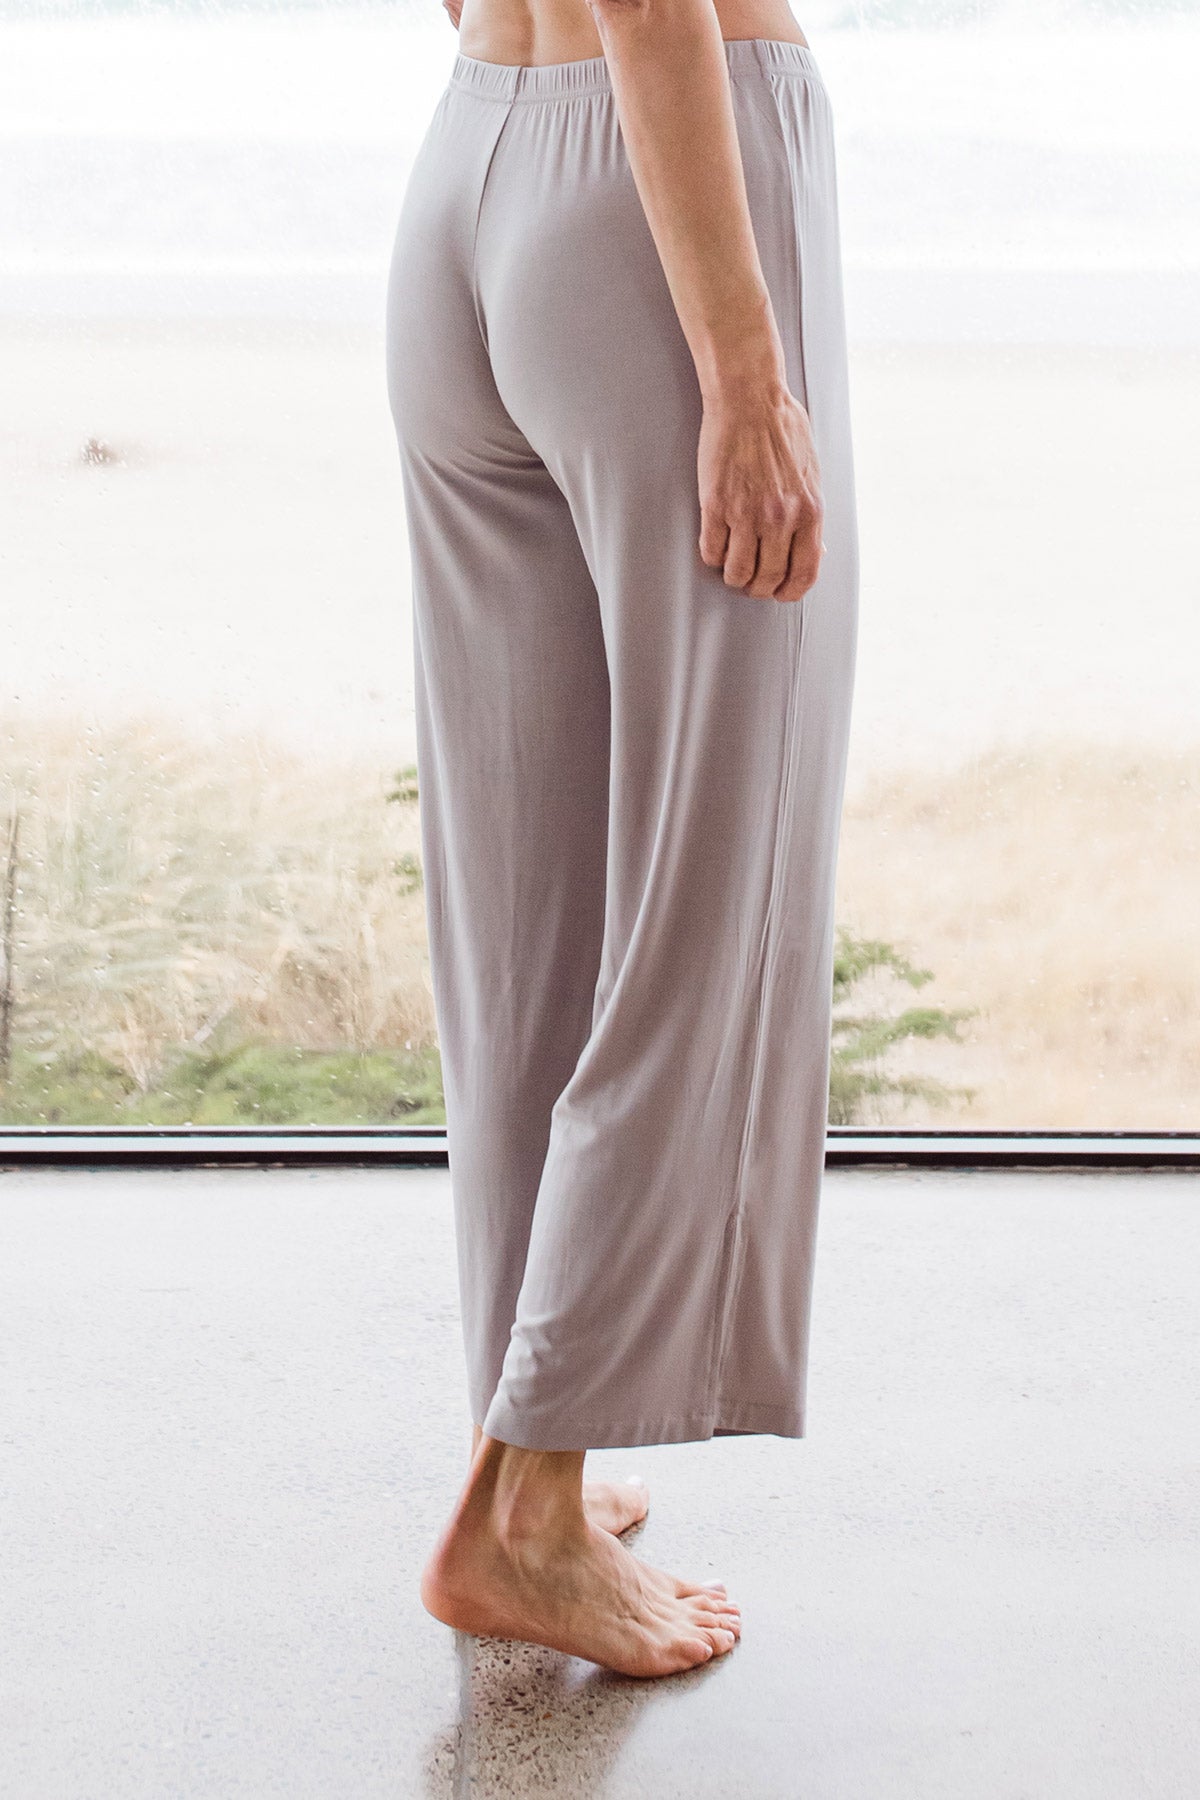 Close shot of a woman's hips and legs from behind, wearing Yala Haley Crossover Front Three Quarter Sleeve Bamboo Pajama Set Bottoms in Ash